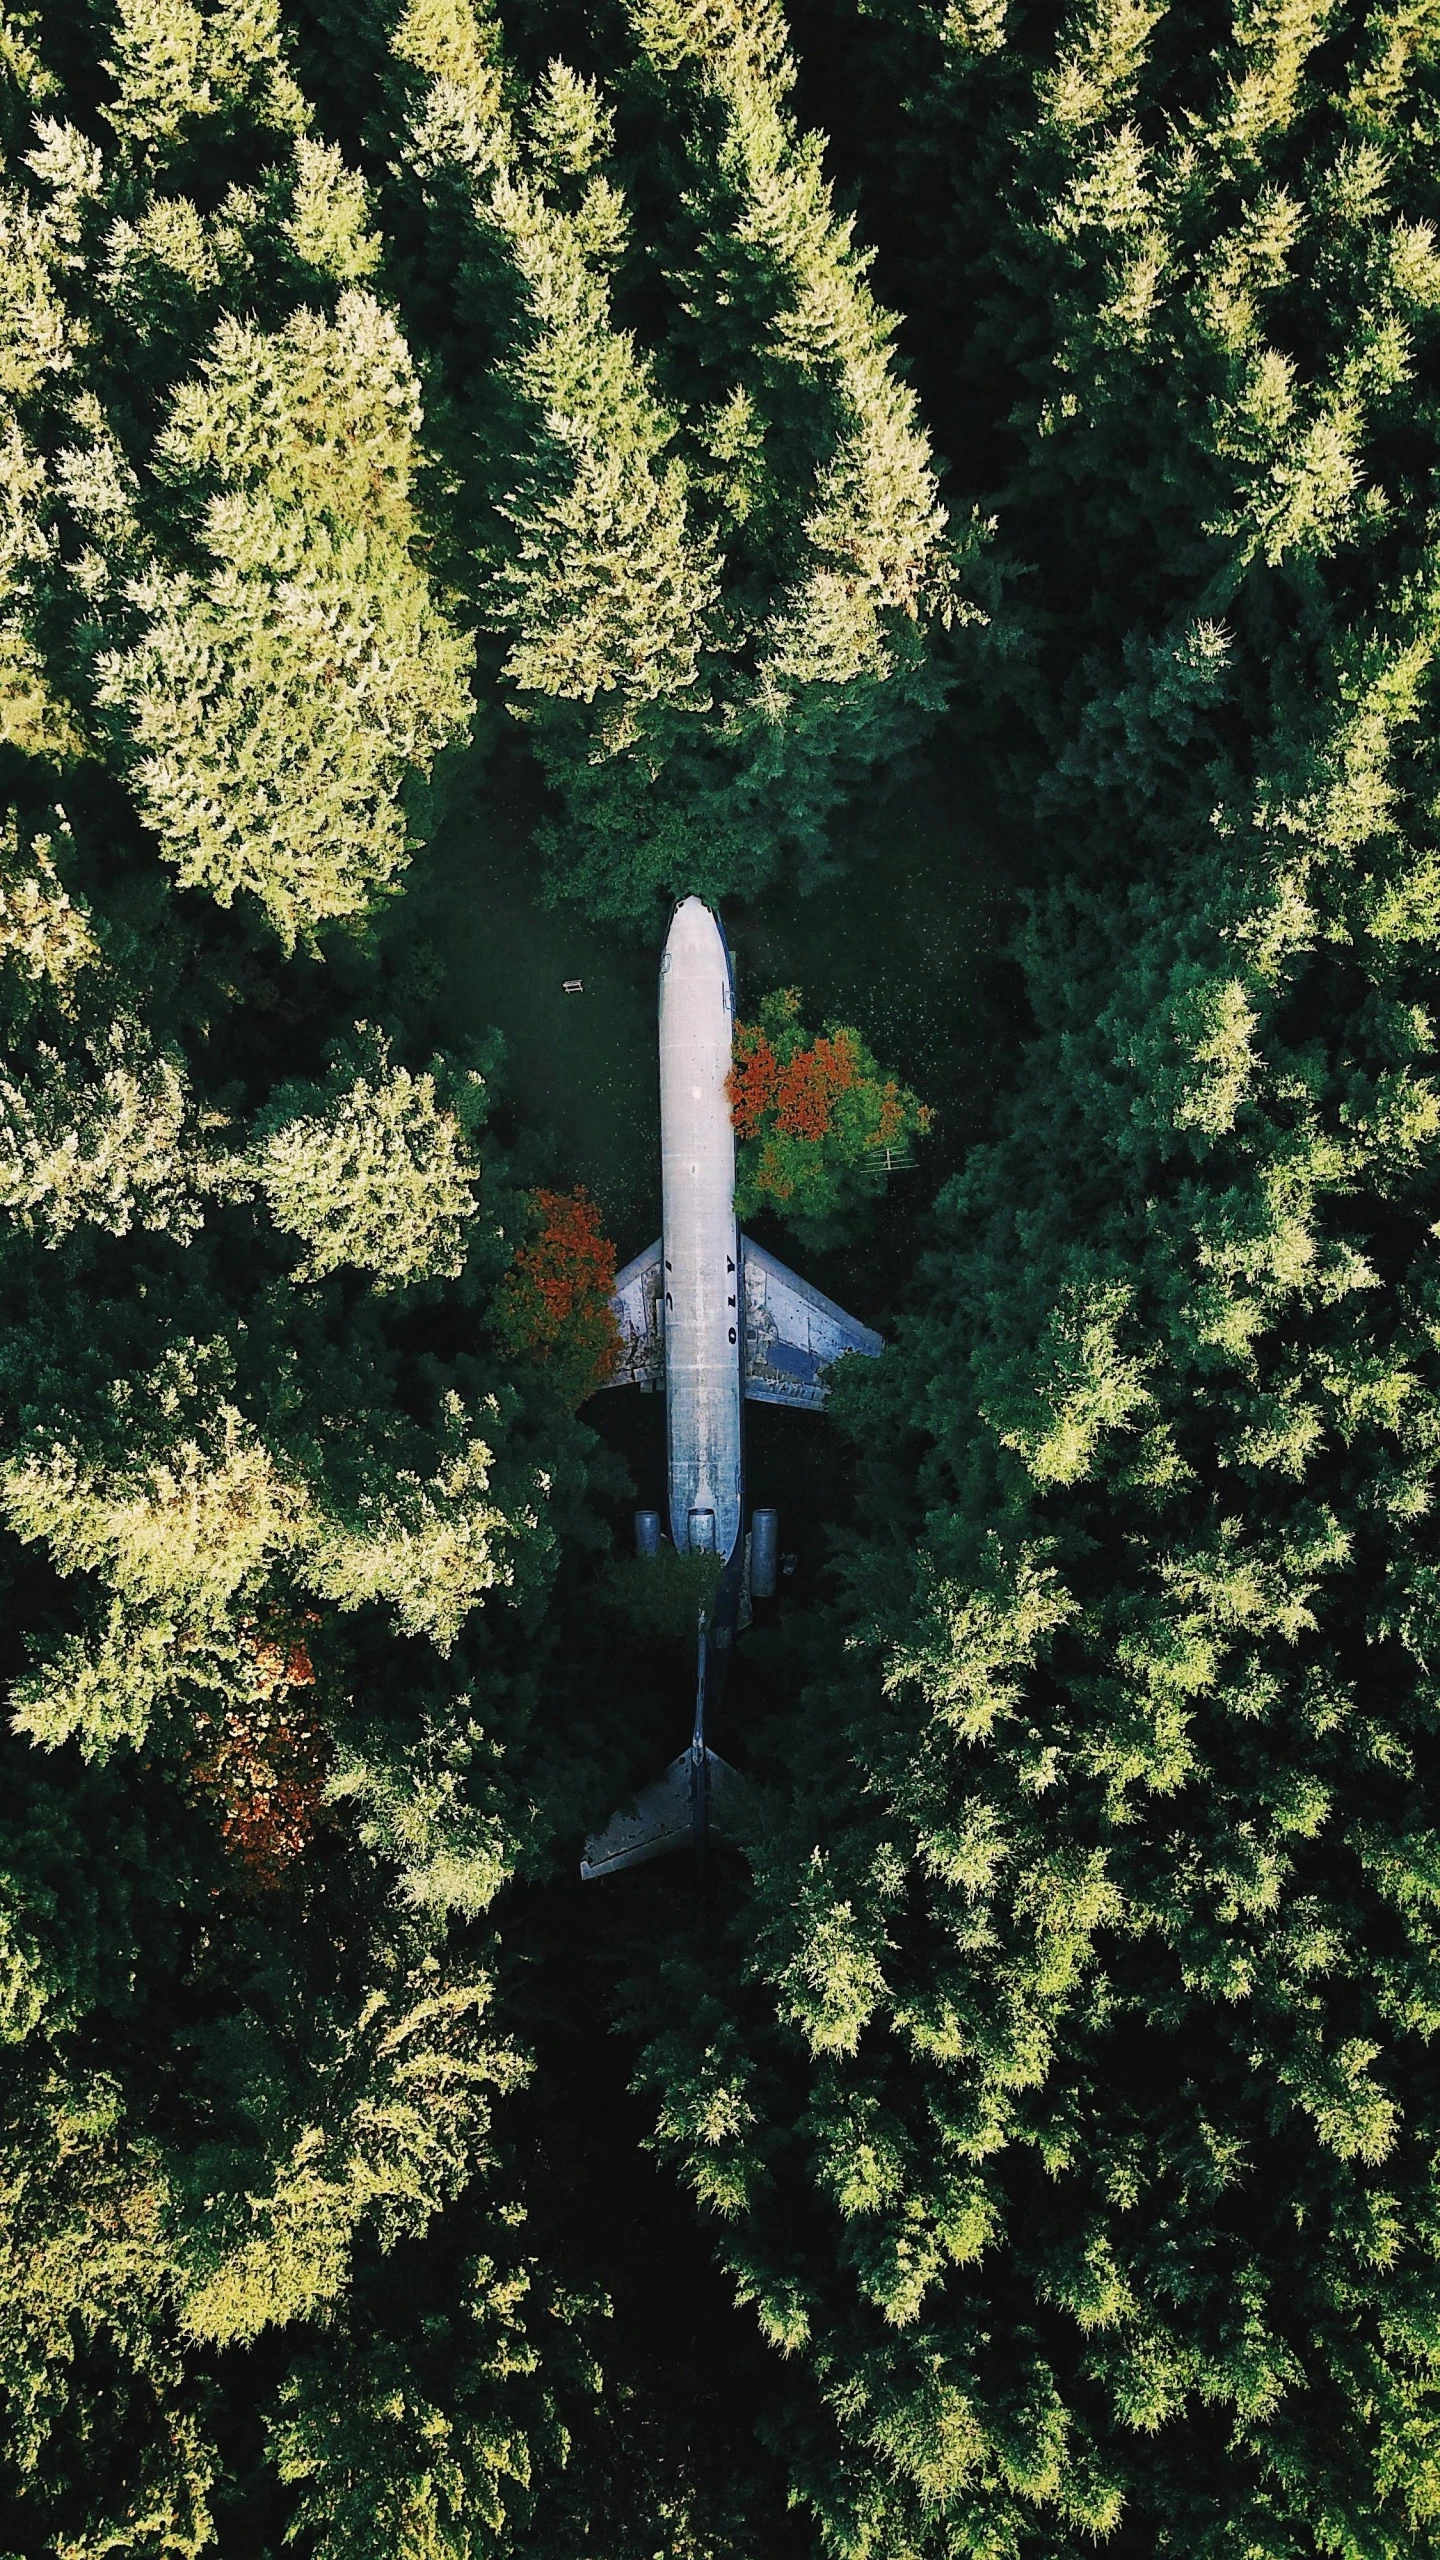 a large jetliner flying through a lush green forest, by Jessie Algie, unsplash contest winner, land art, trees growing on its body, shot on iphone, abandoned rocketship, photographed for reuters